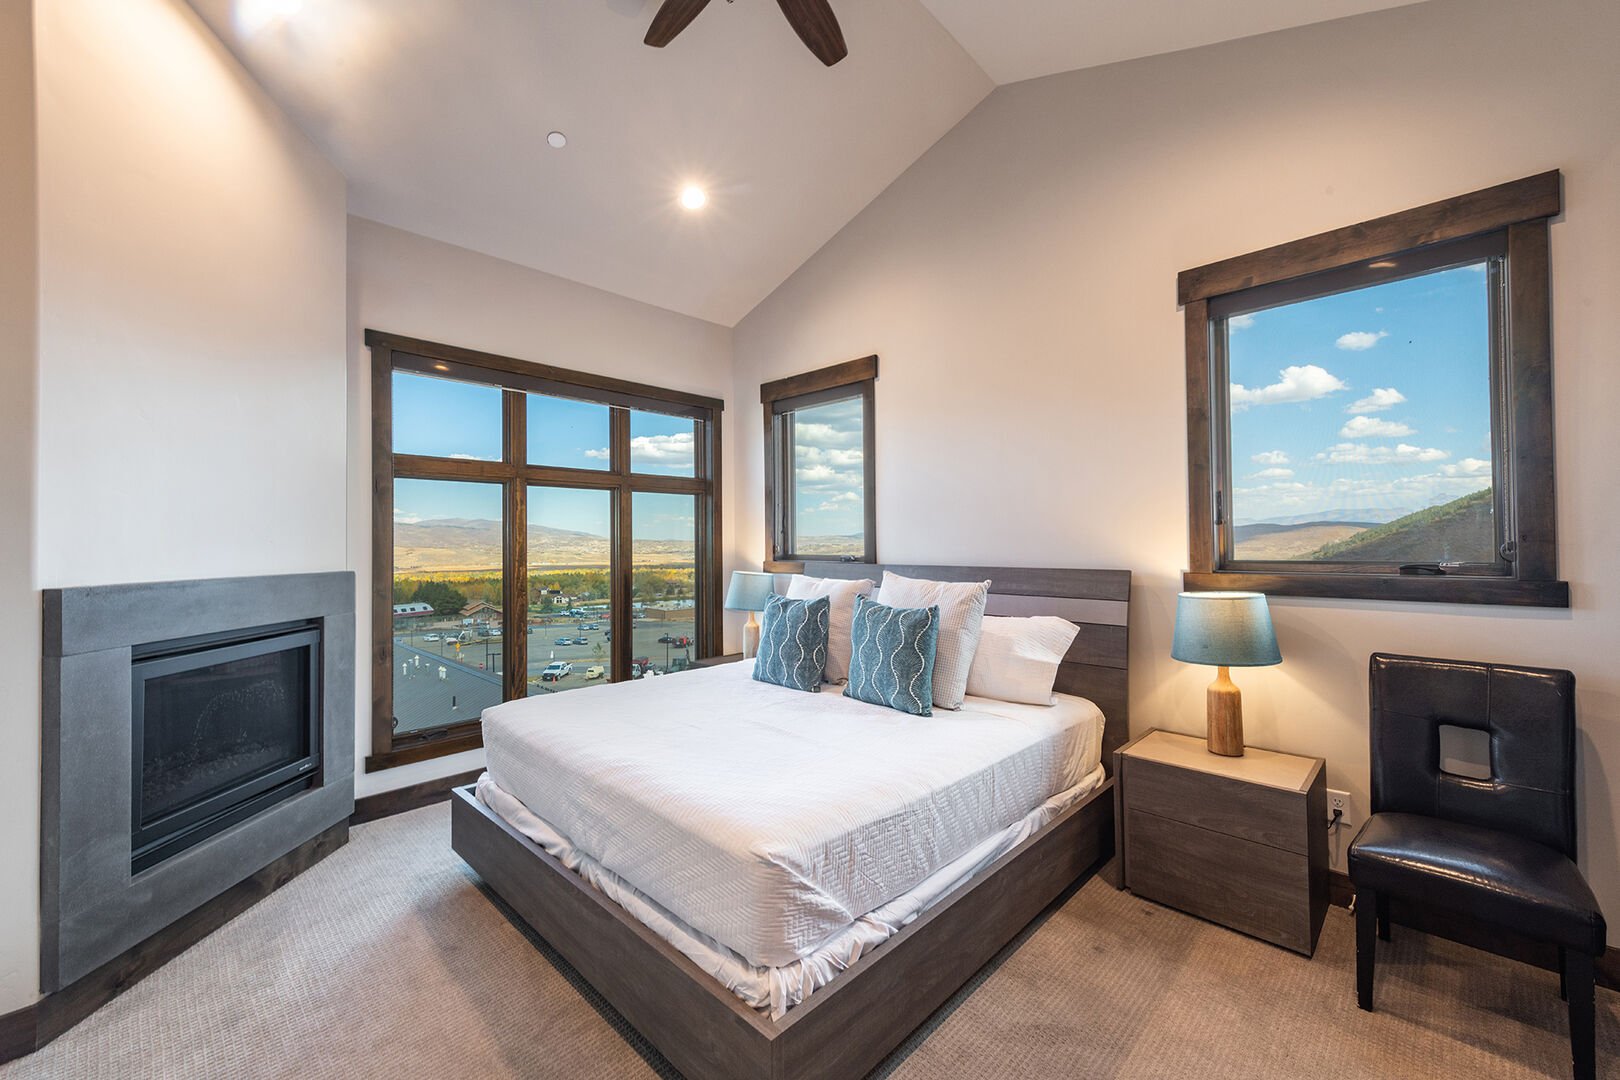 Master bedroom has king bed, fireplace, and a view of the lift